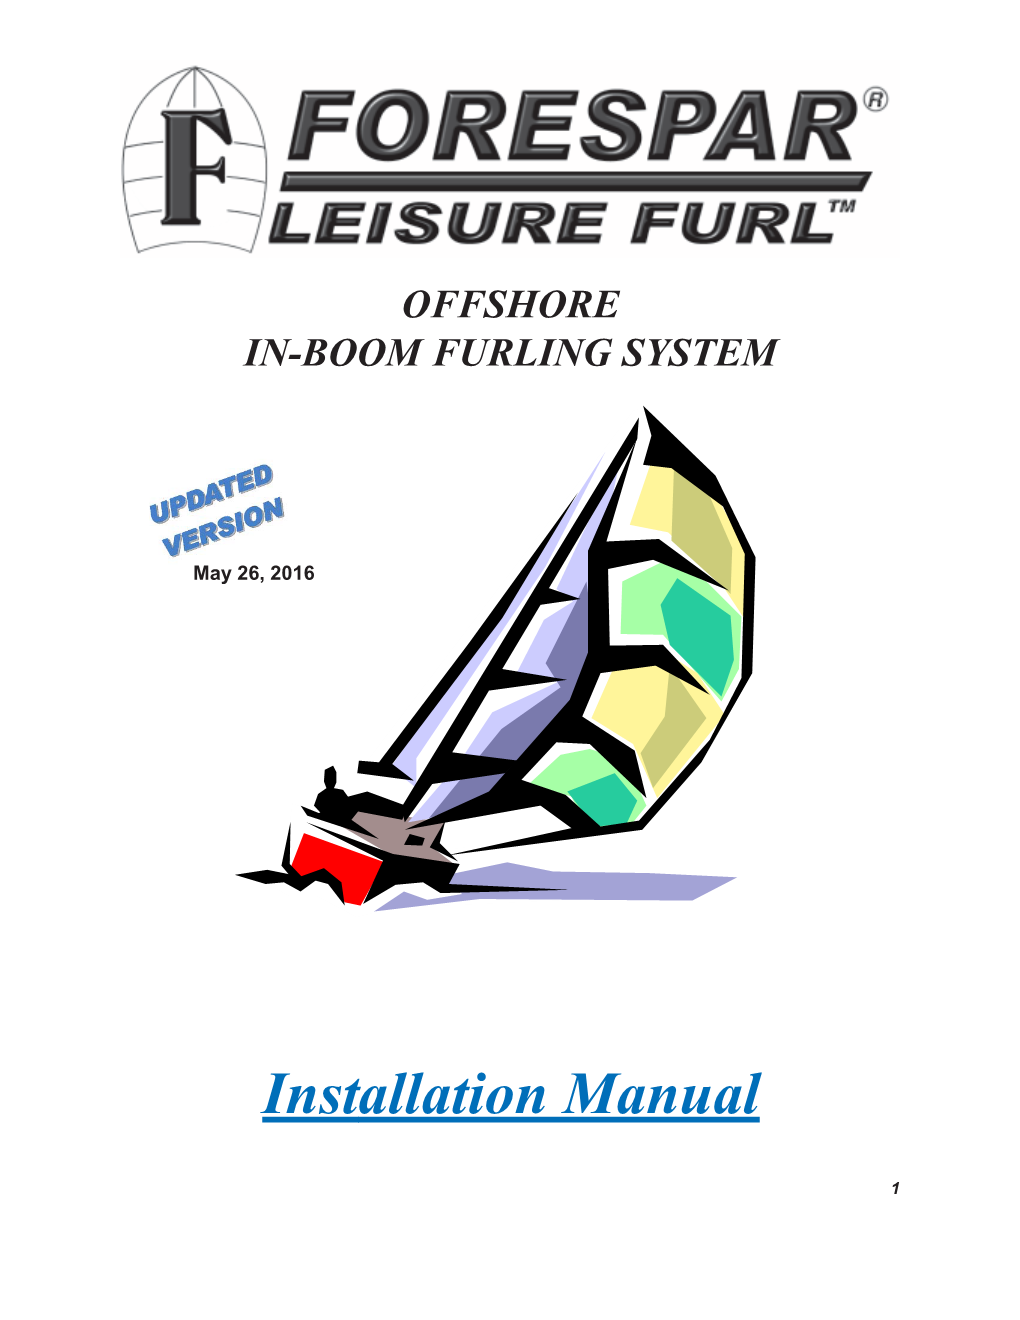 Leisure Furl ® Offshore System Installation Manual